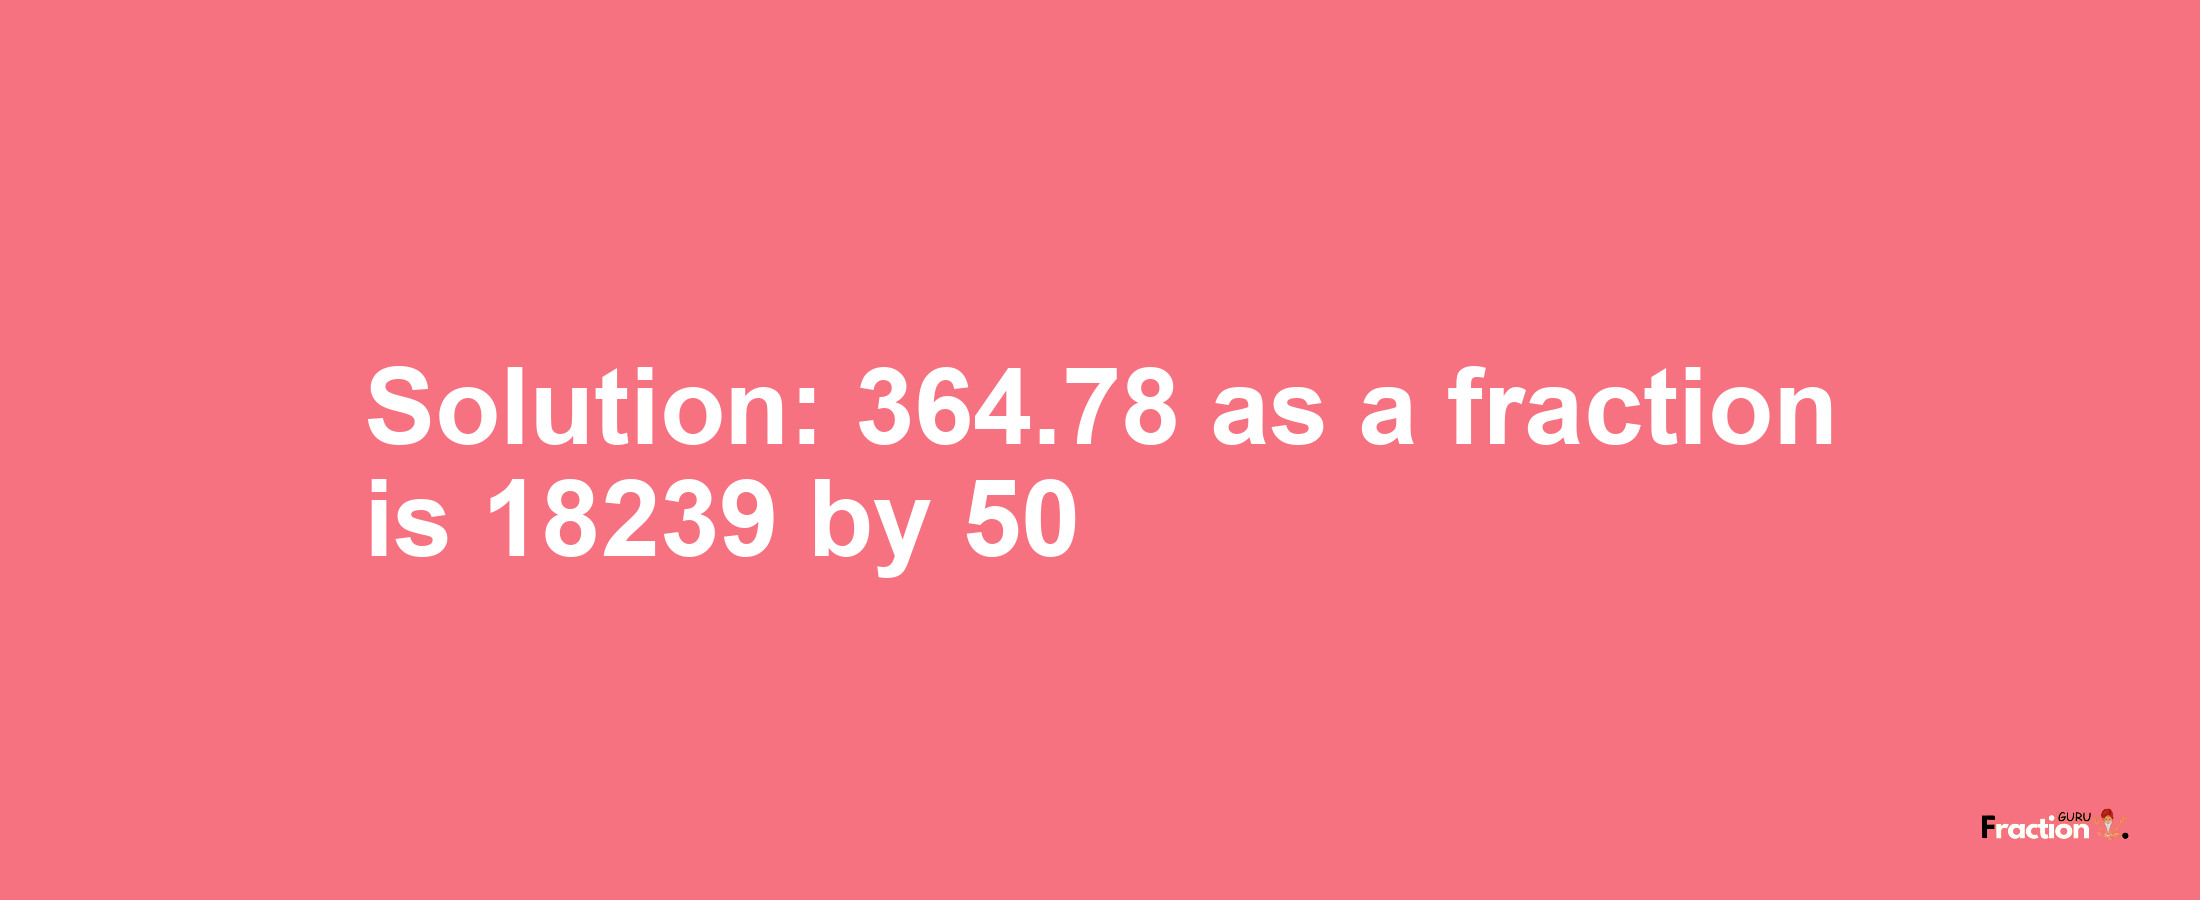 Solution:364.78 as a fraction is 18239/50